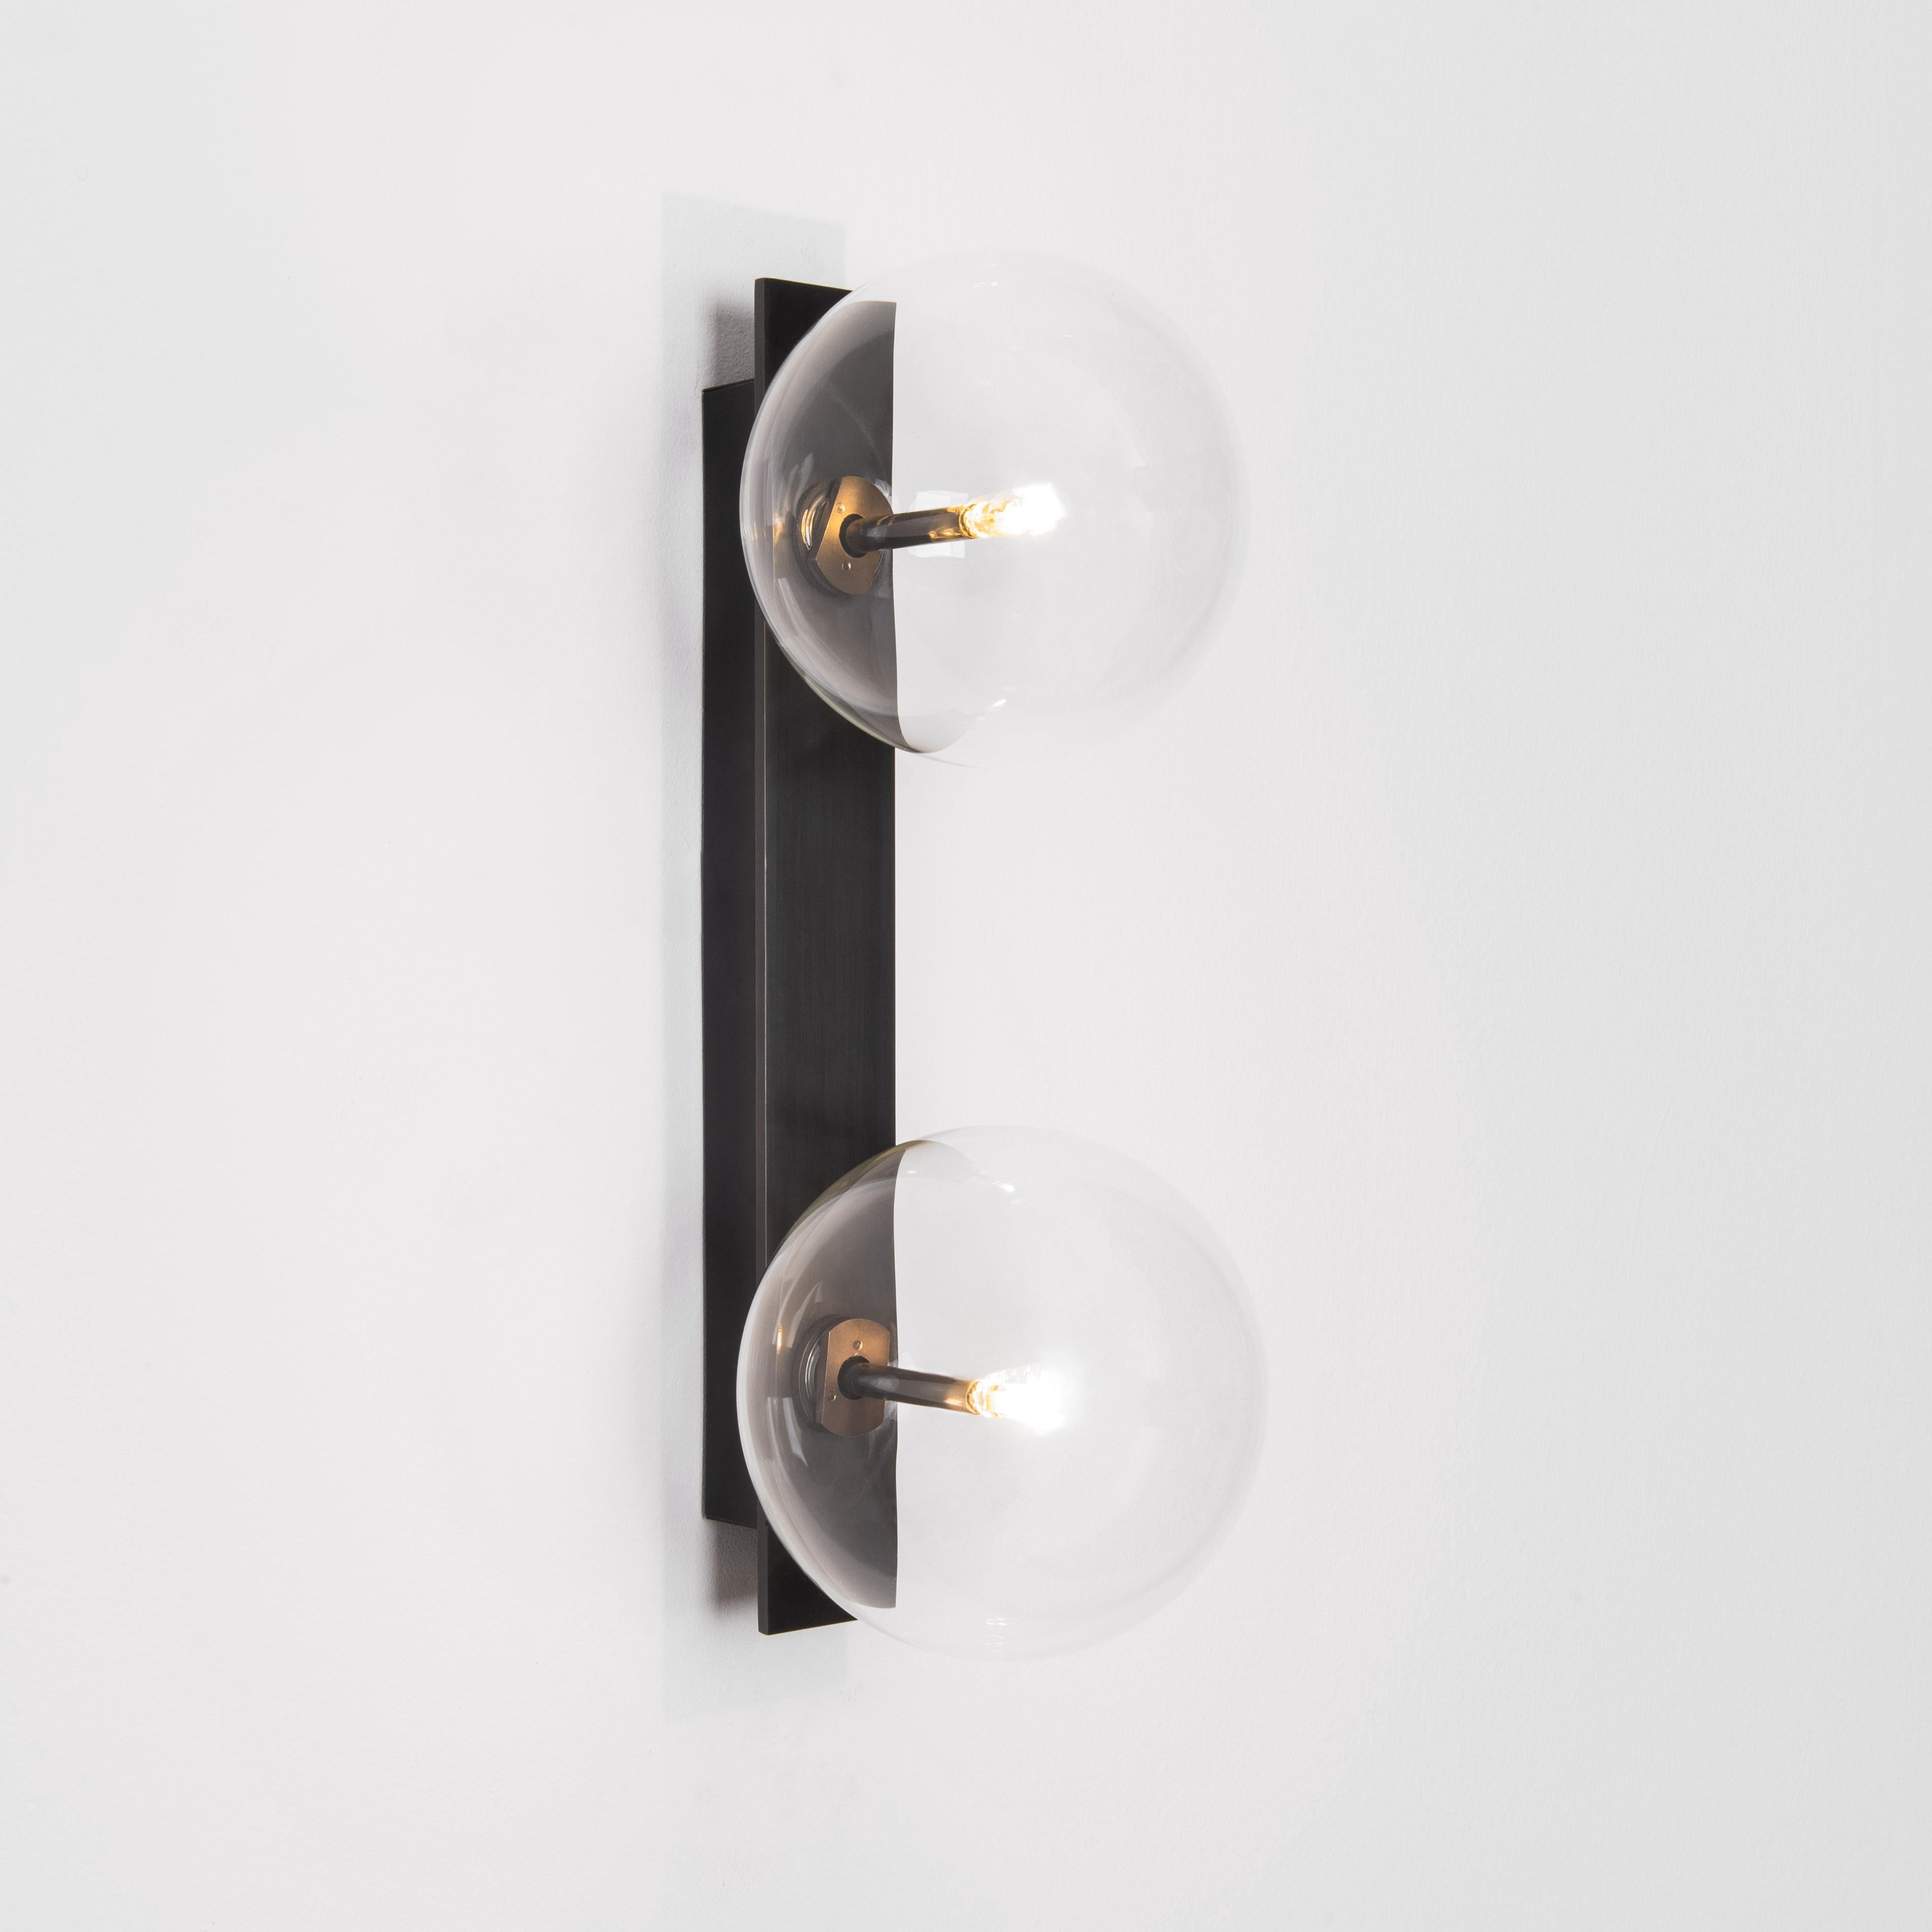 Polish Oslo Dual Wall Sconce by Schwung For Sale